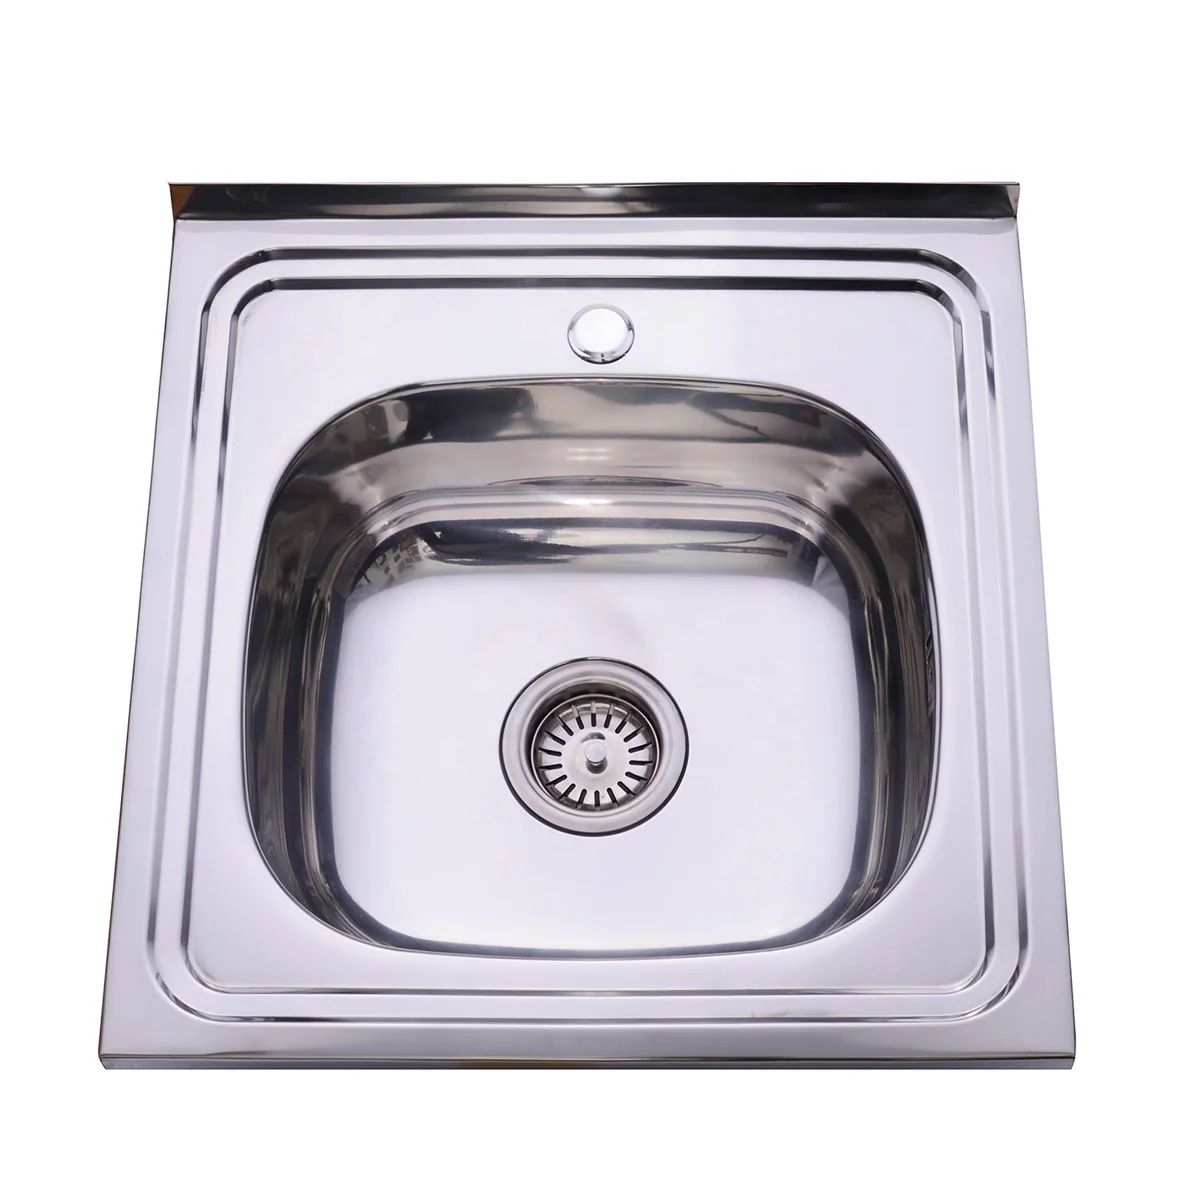 180mm Depth Stainless Sink For Campers Hot Sale In America 5050 Buy Kitchen Sink